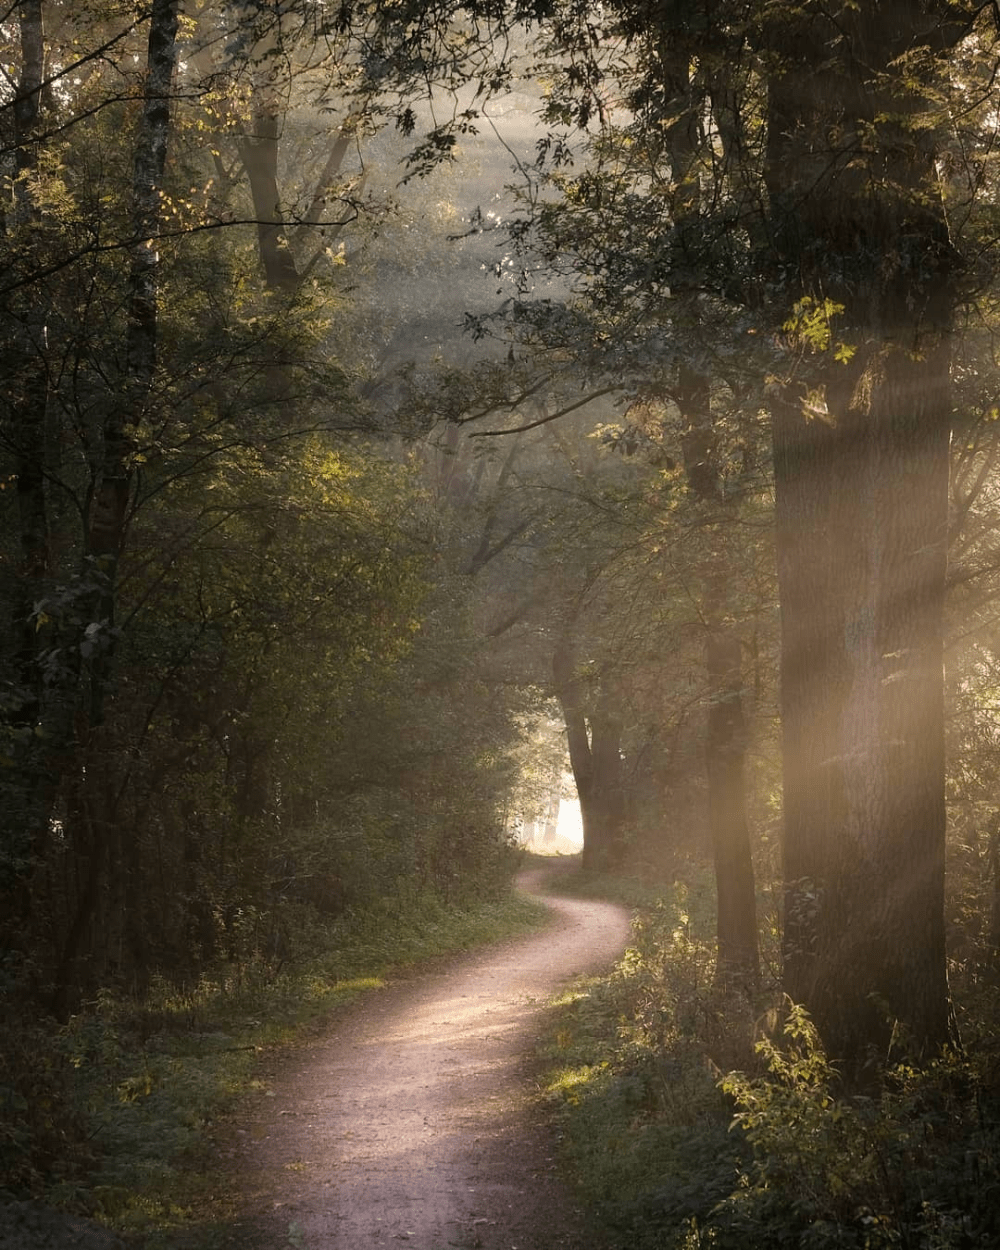 A path through a forest with sunlight shining through the trees. - Goblincore